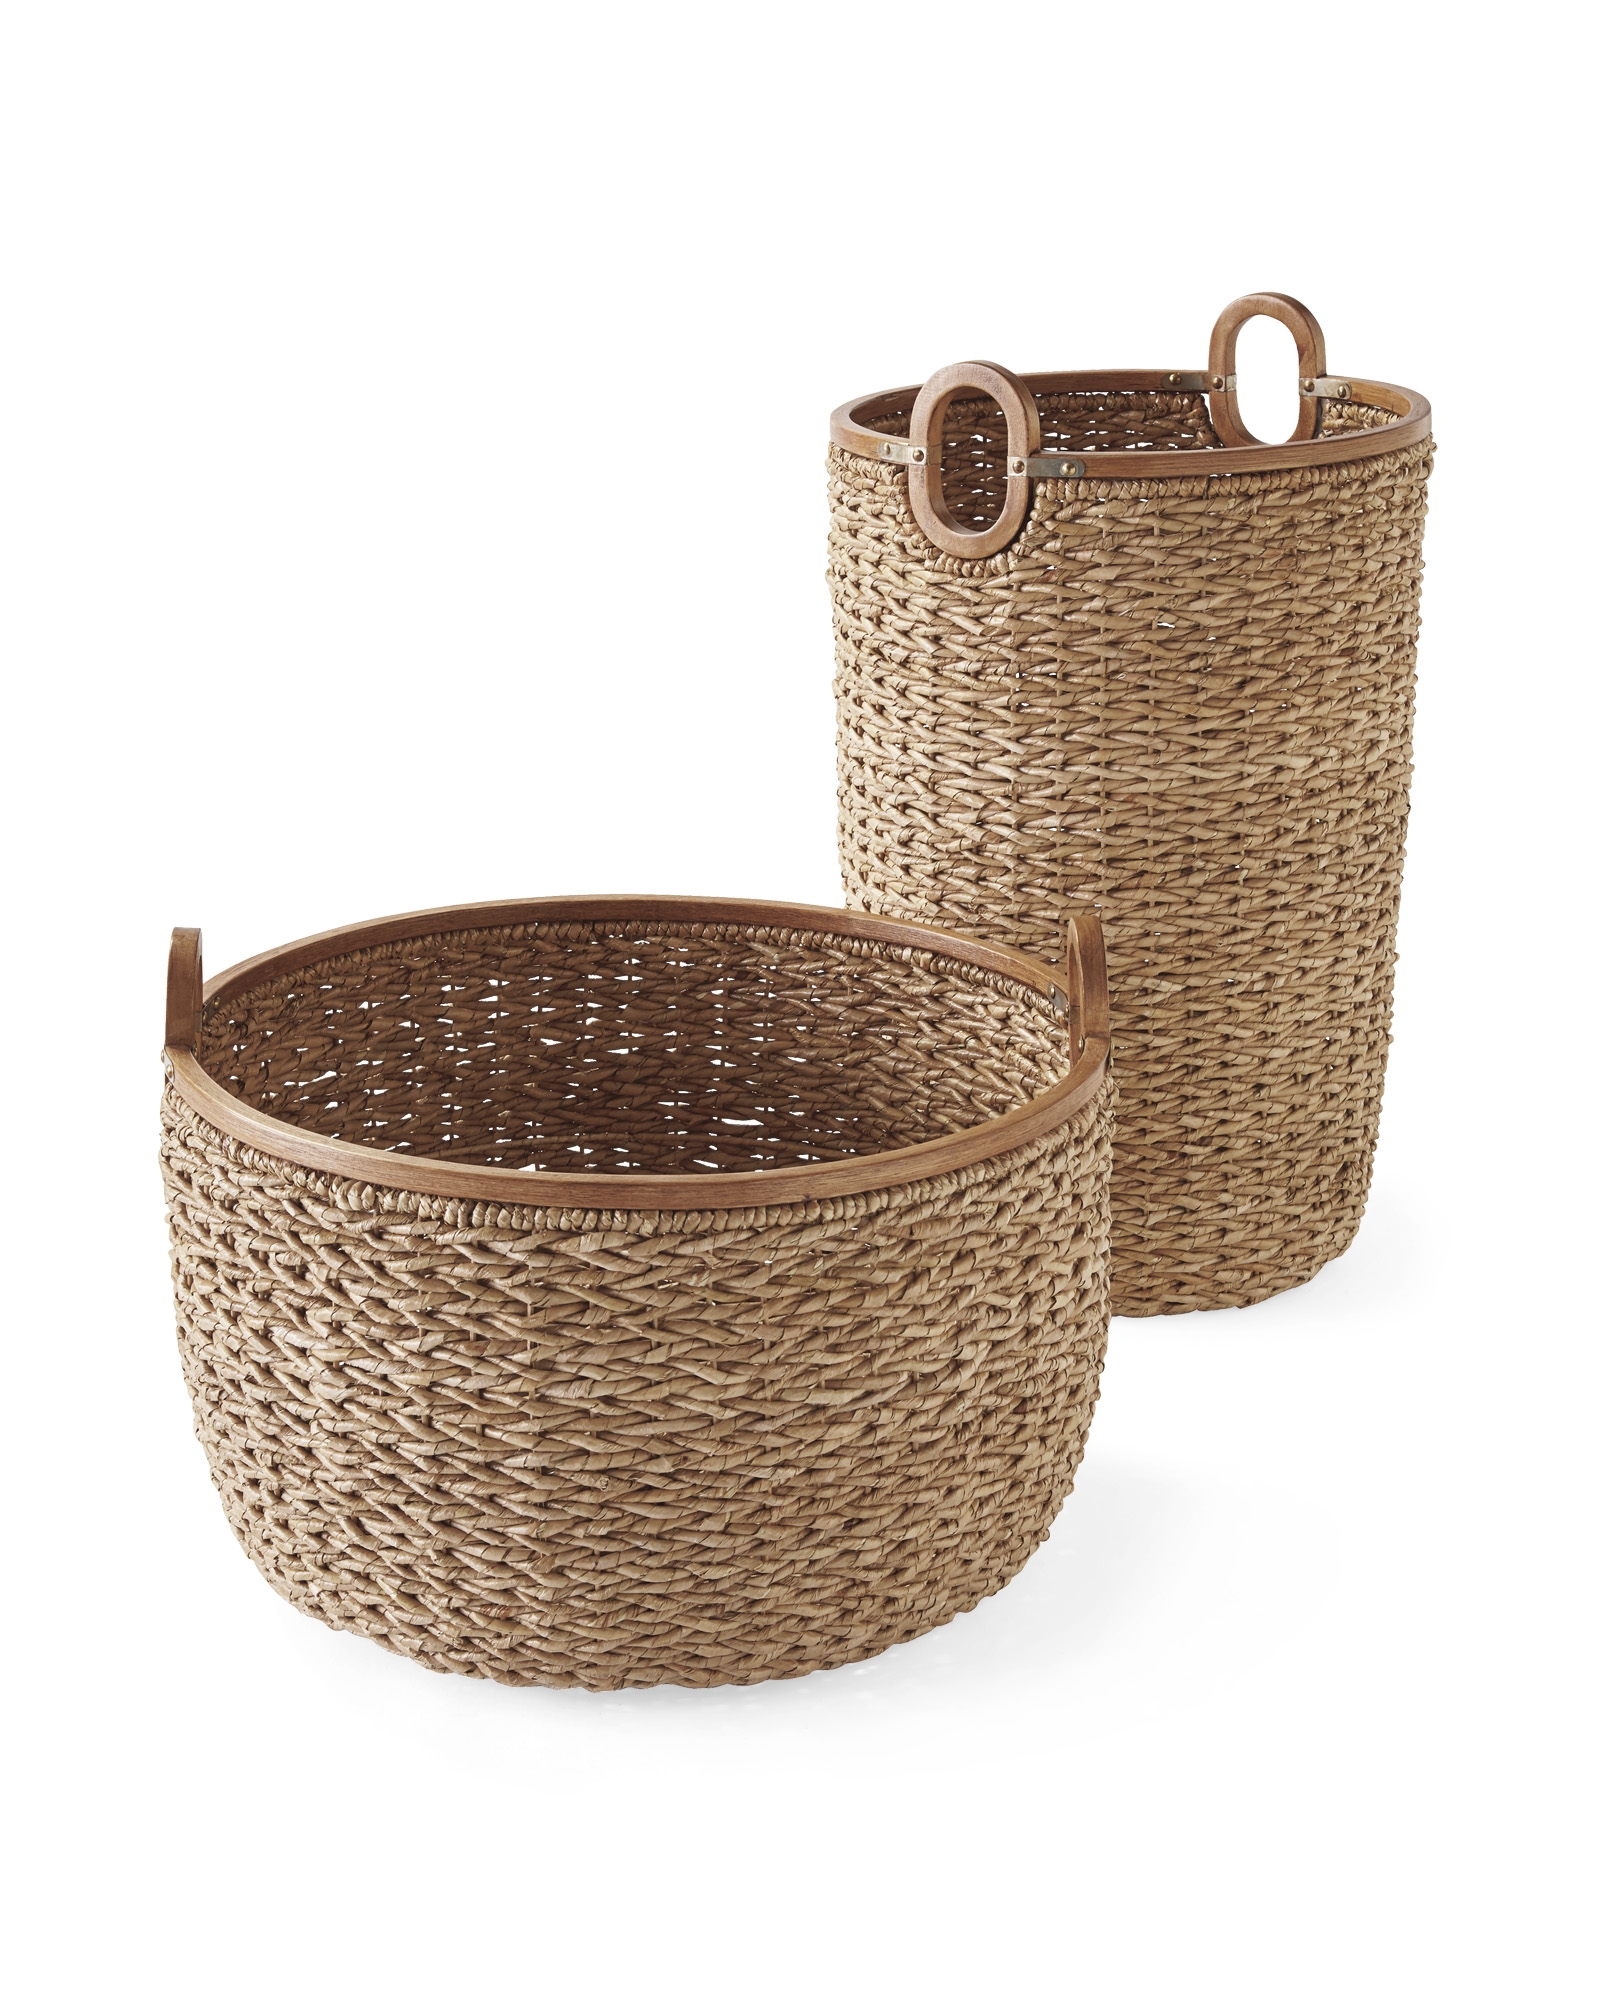 Seagrass Basket - Tall - Image 2